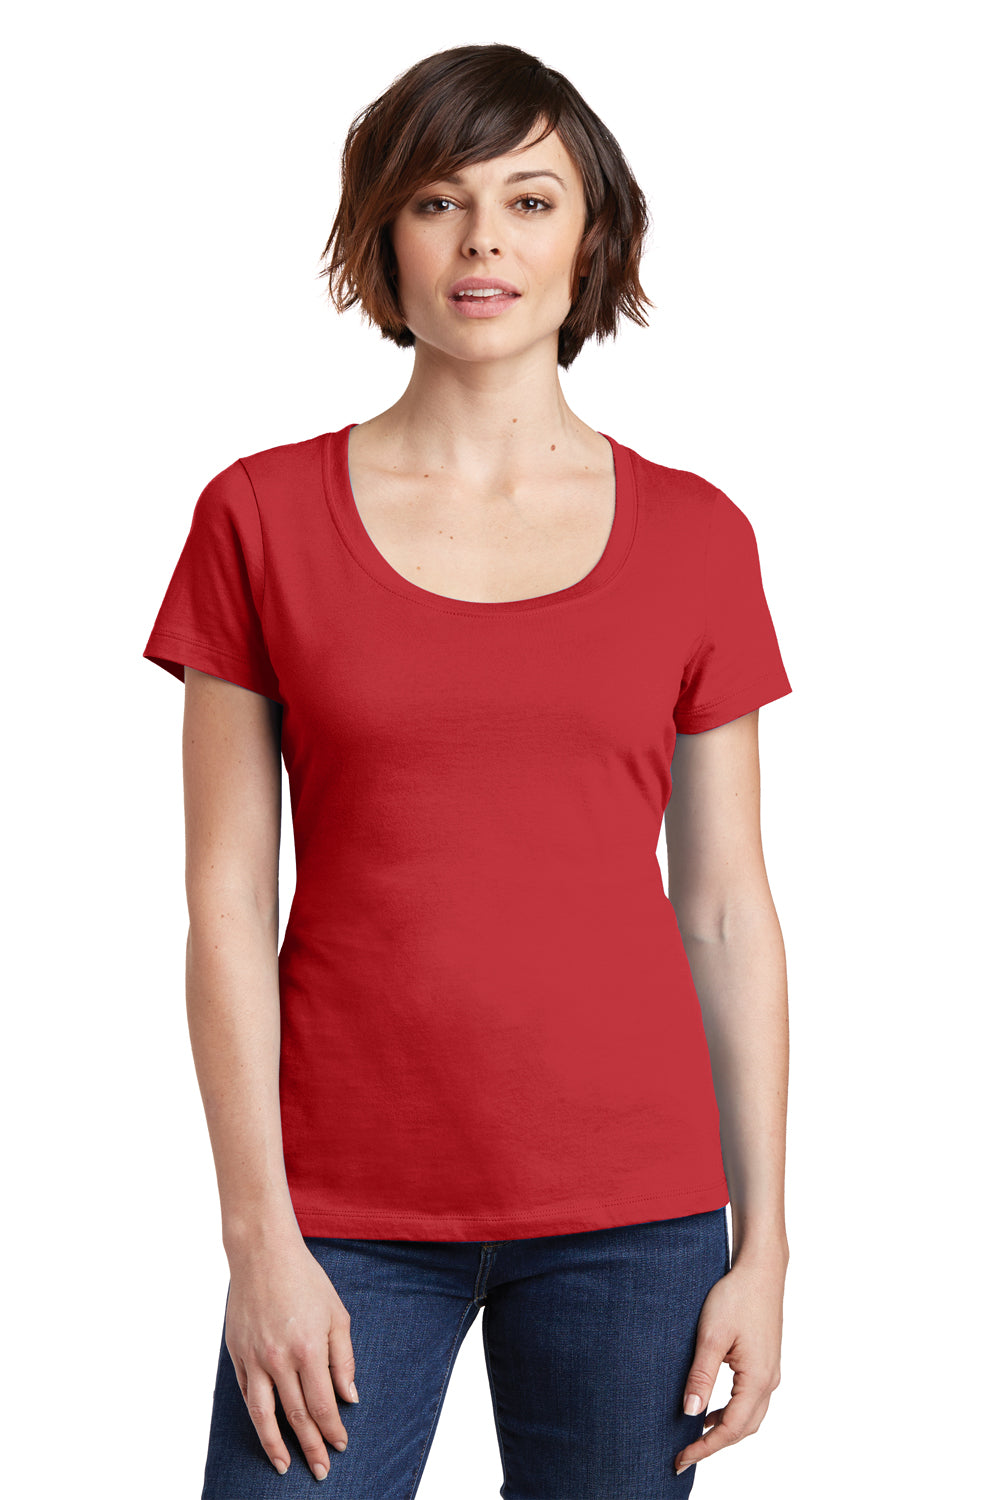 District DM106L Womens Perfect Weight Short Sleeve Scoop Neck T-Shirt Red Front